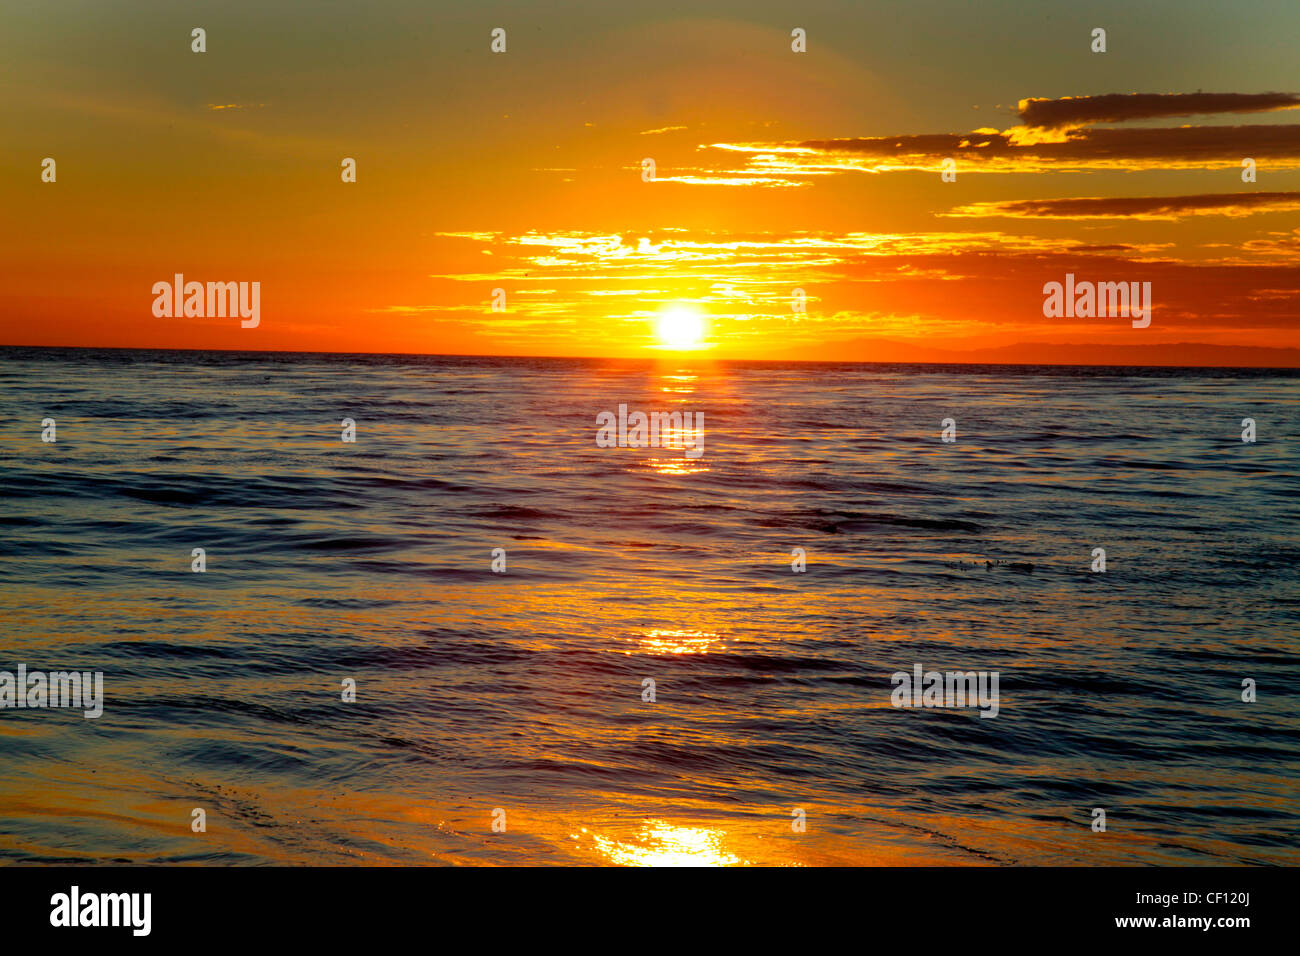 SUNSET OVER THE PACIFIC,CALIFORNIA,USA Stock Photo